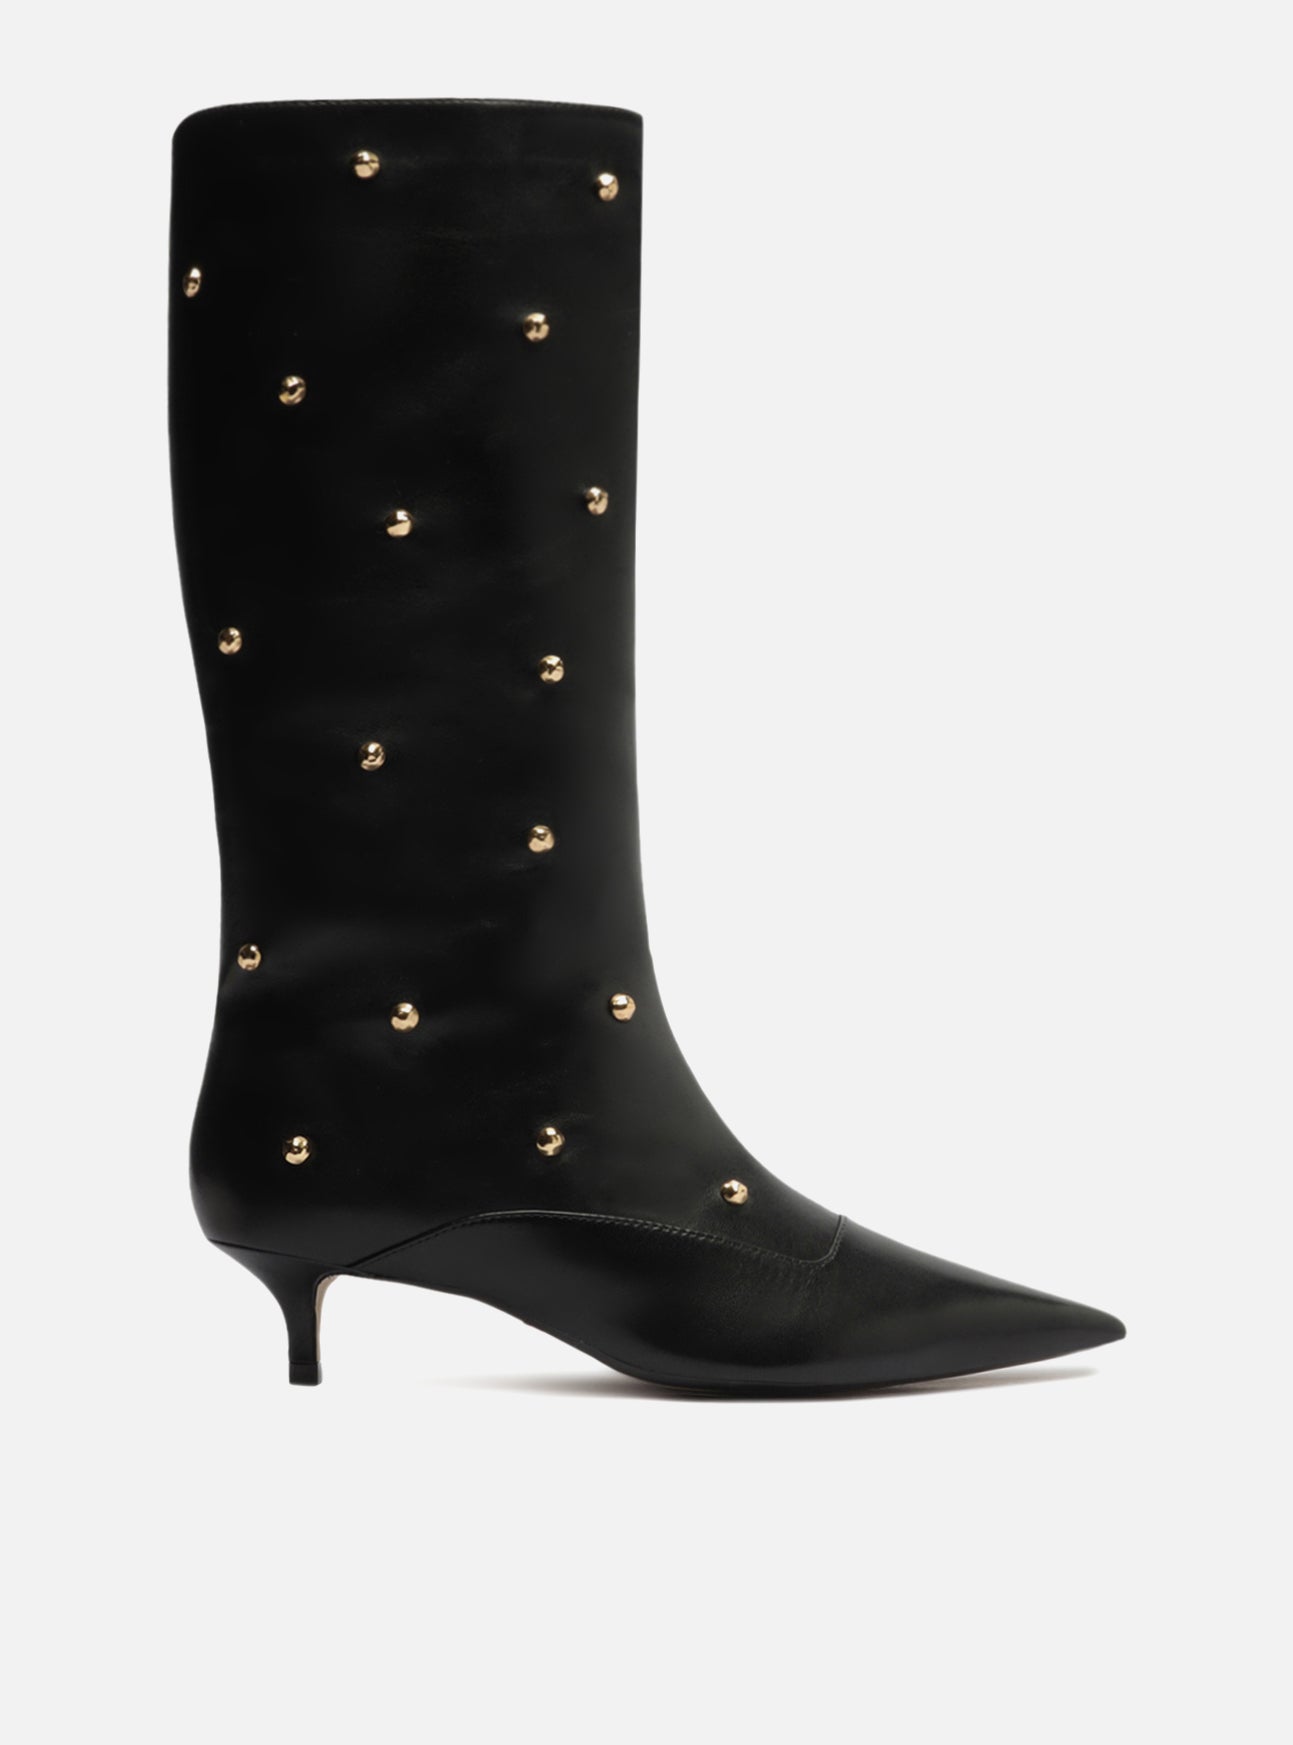 Black leather boot with mid-shaft silhouette, a low heel, and a pointed toe. It has a snug-fitting upper and golden metallic studs applied throughout the shaft.